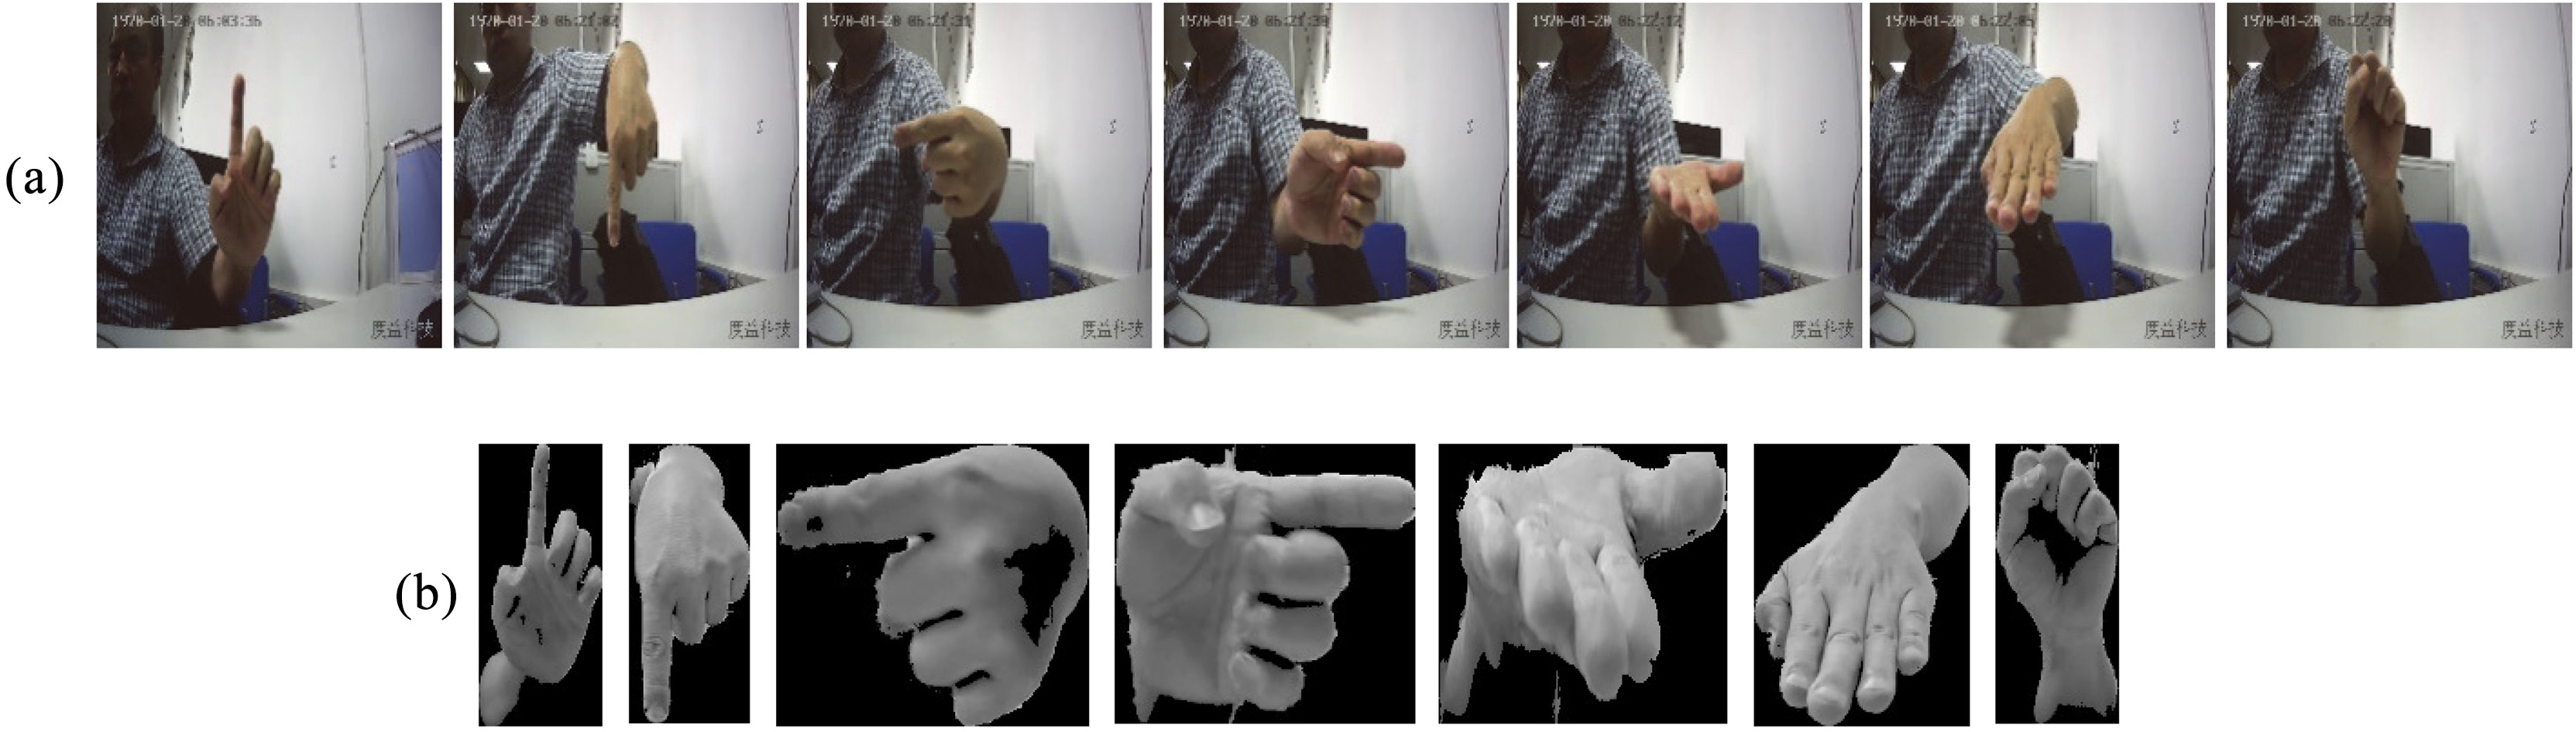 a. hand gestures used in our experiment; b. gesture samples extracted from the row image.